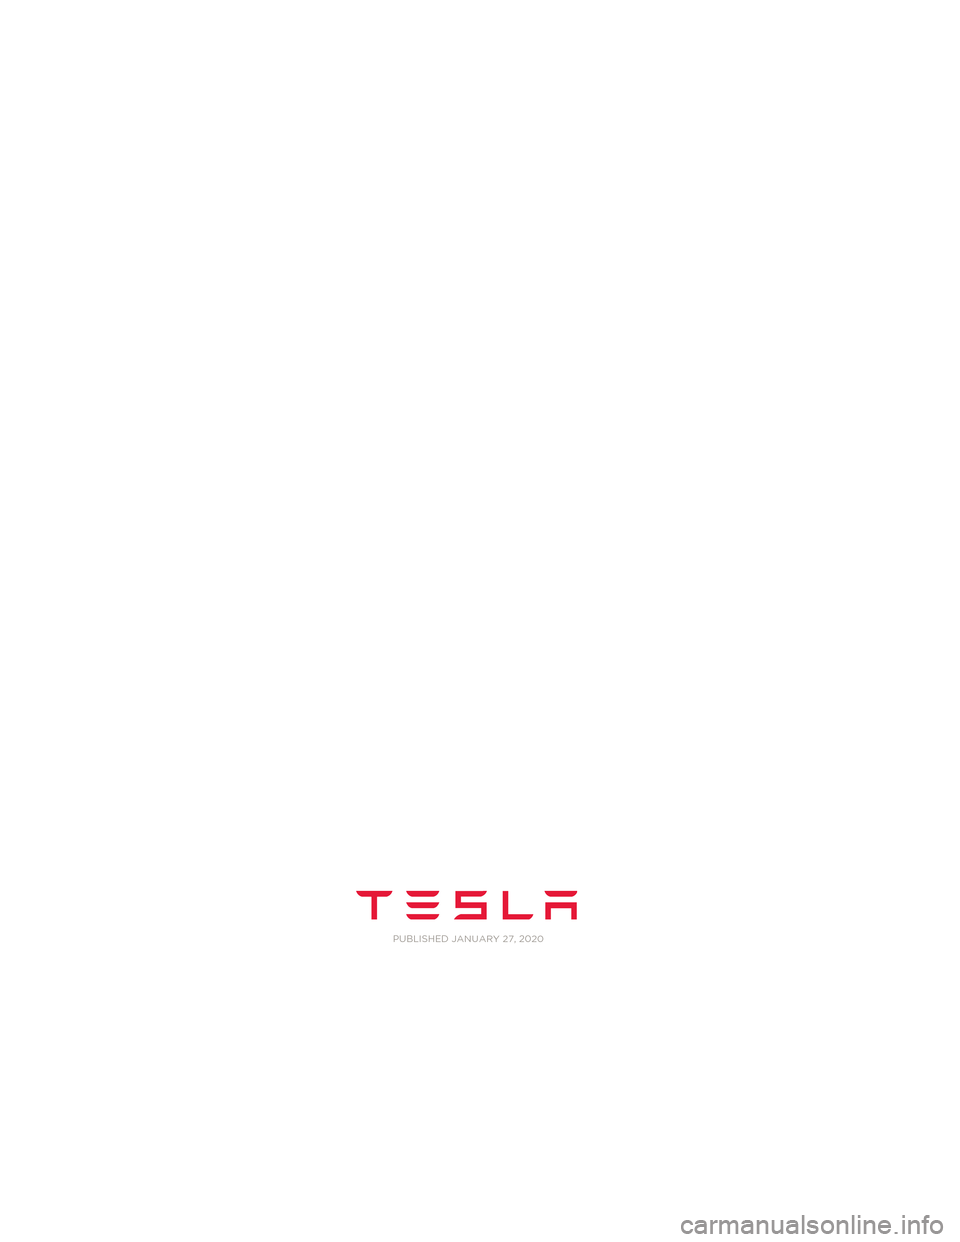 TESLA MODEL 3 2020  Betriebsanleitung Model S Quick Guide - NA Rev C.book  Page 2  Wednesday, December 18, 2013  12:40 PM P
UBLISHED JANUARY 27, 2020 